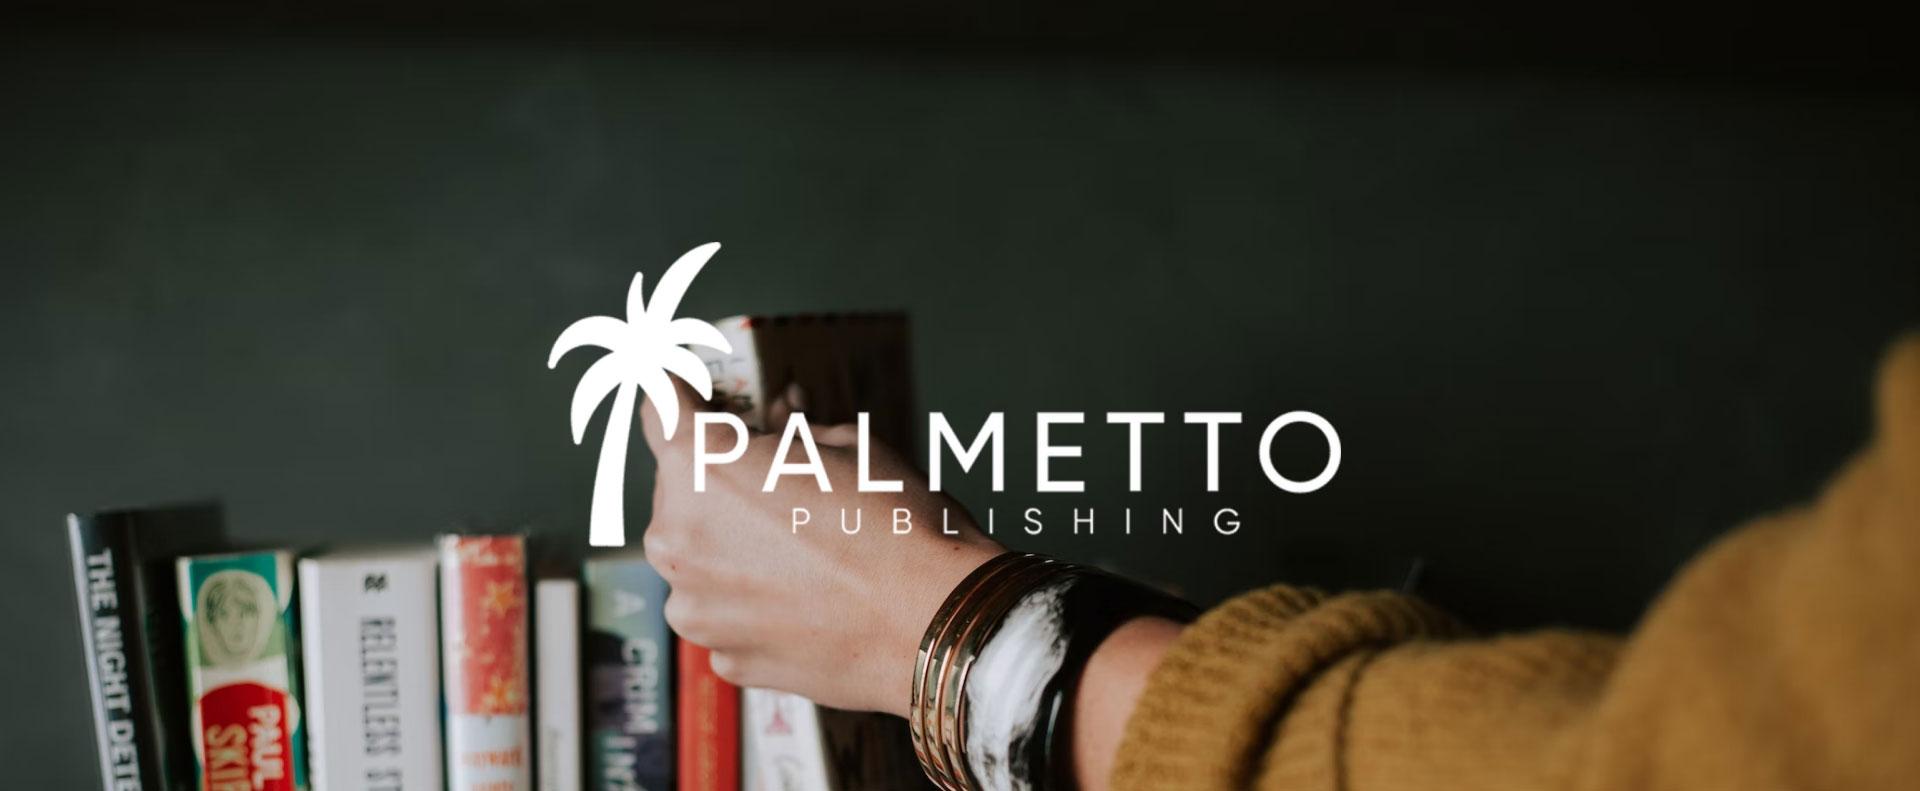 Lineout case study showing SEO, SEM, CRO, and web design results for Palmetto Publishing